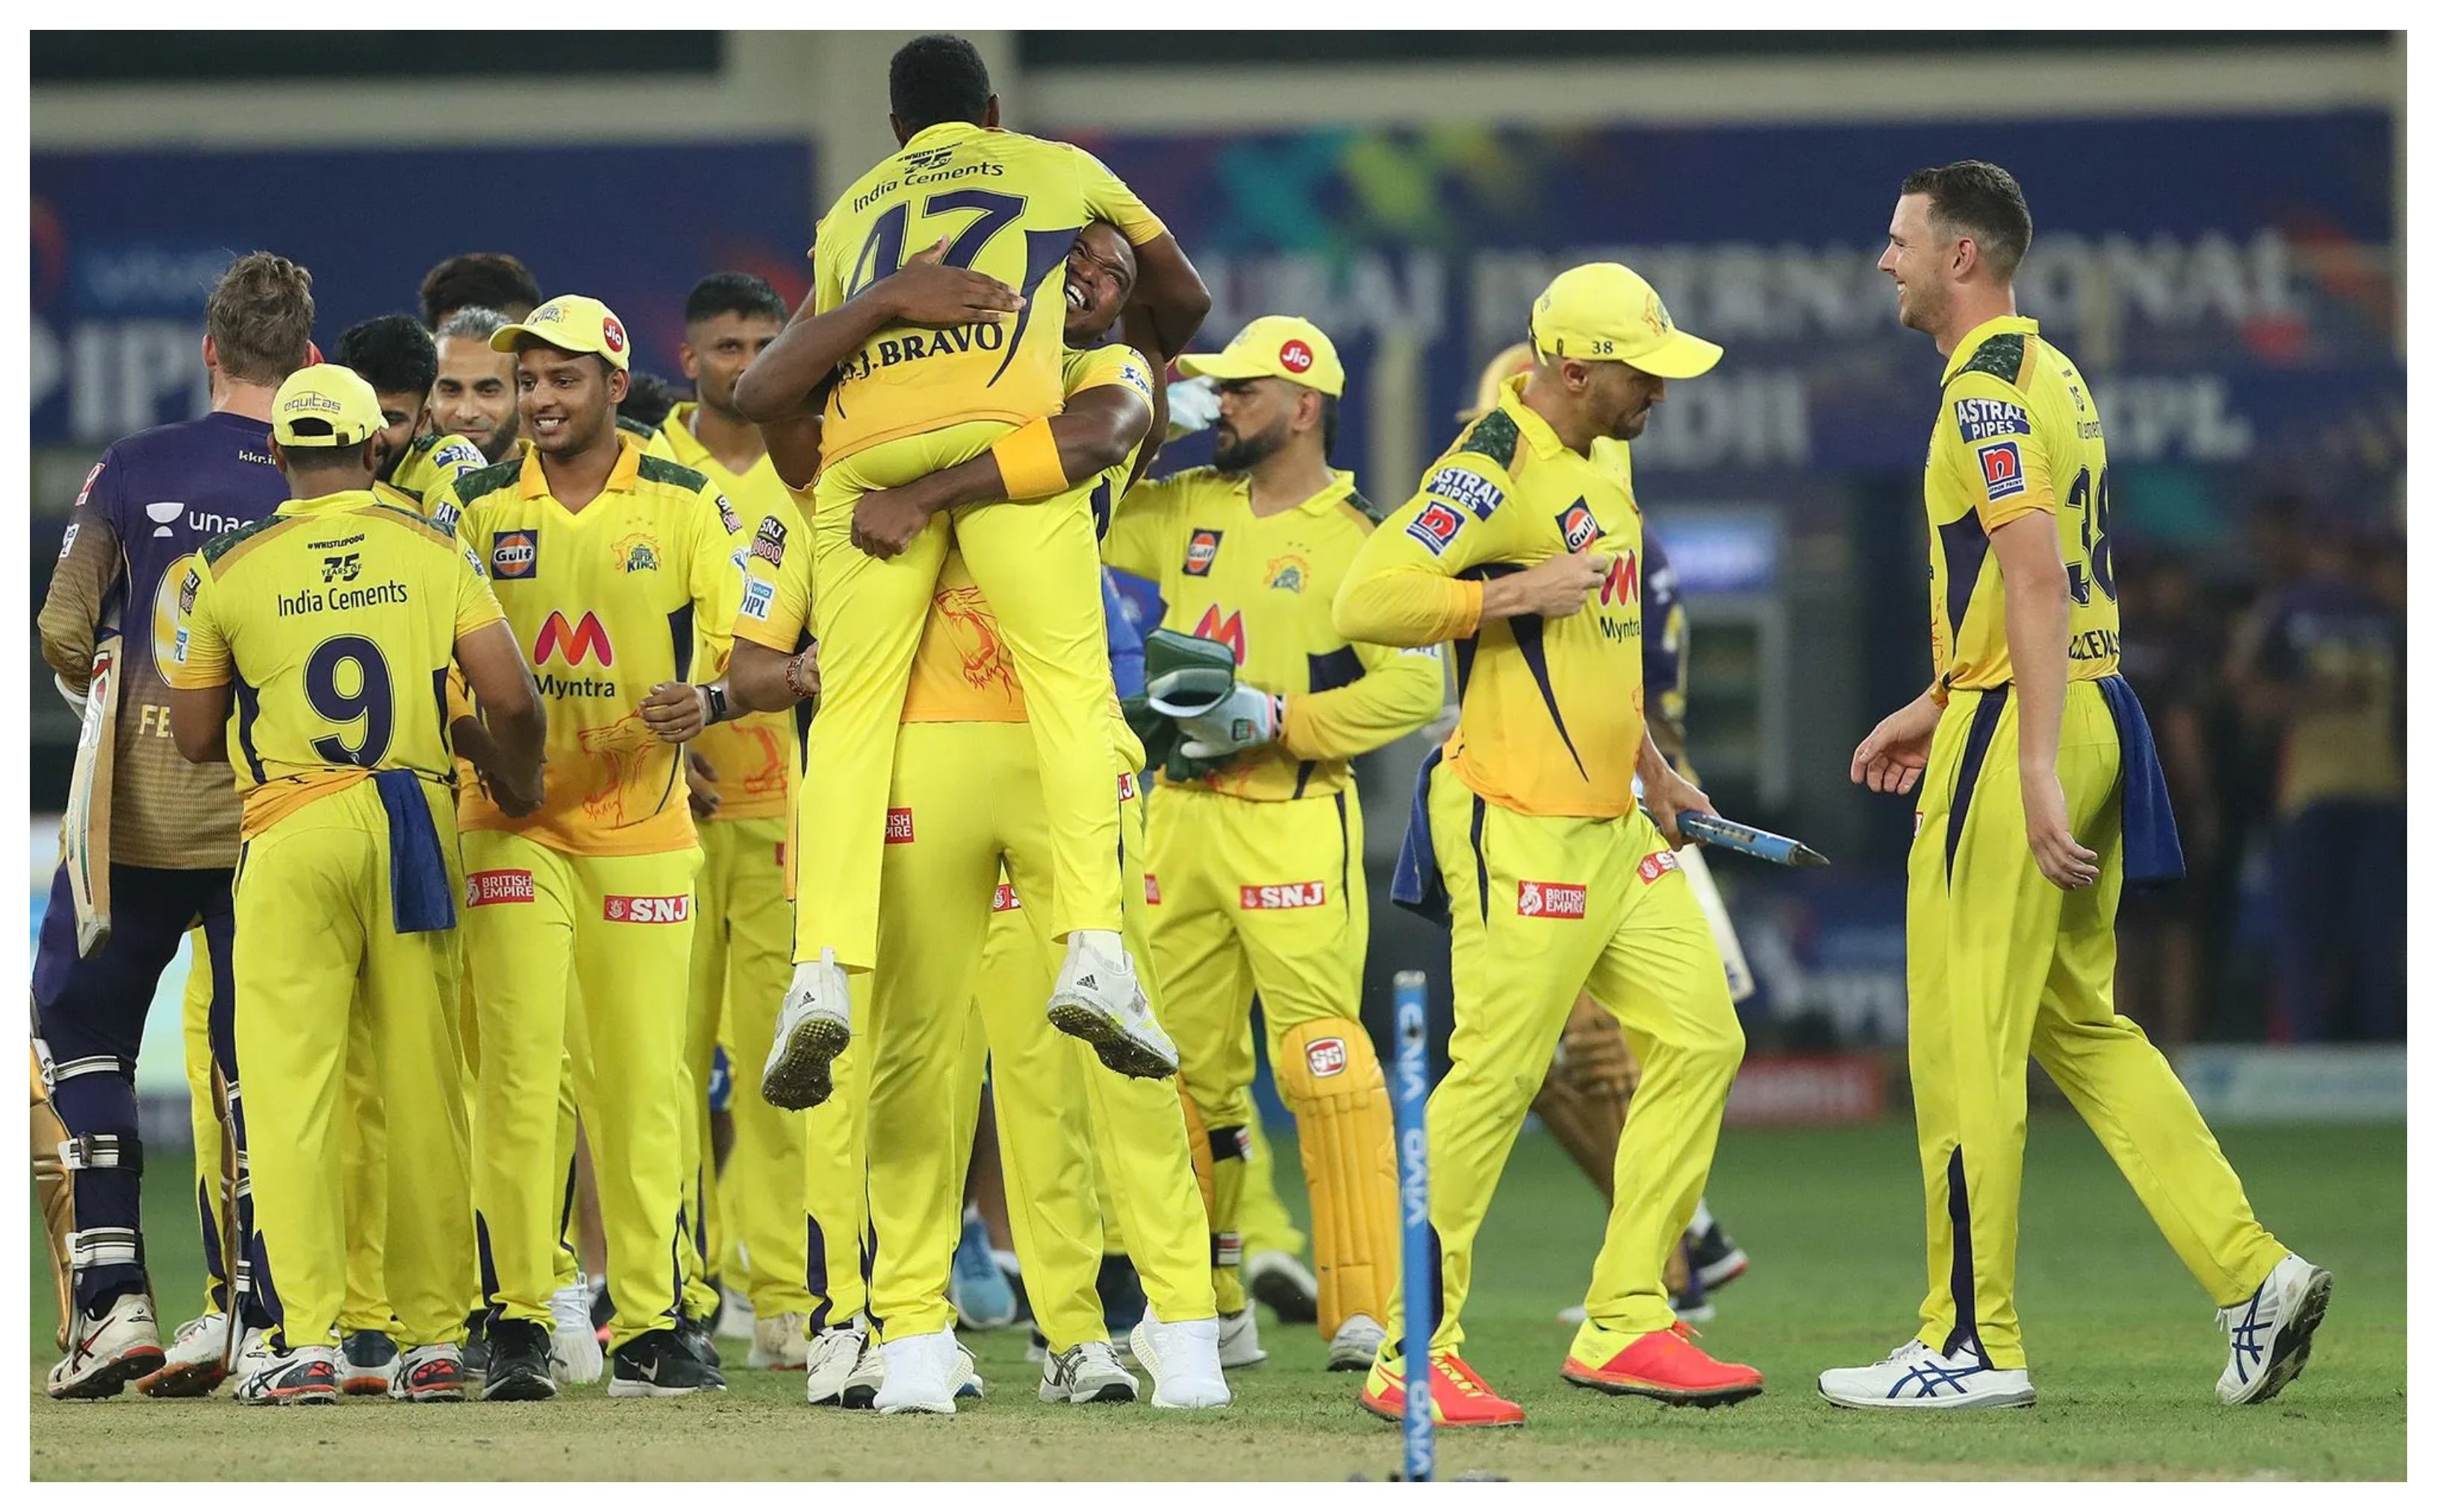 CSK outplayed KKR in the IPL 2021 final | BCCI/IPL